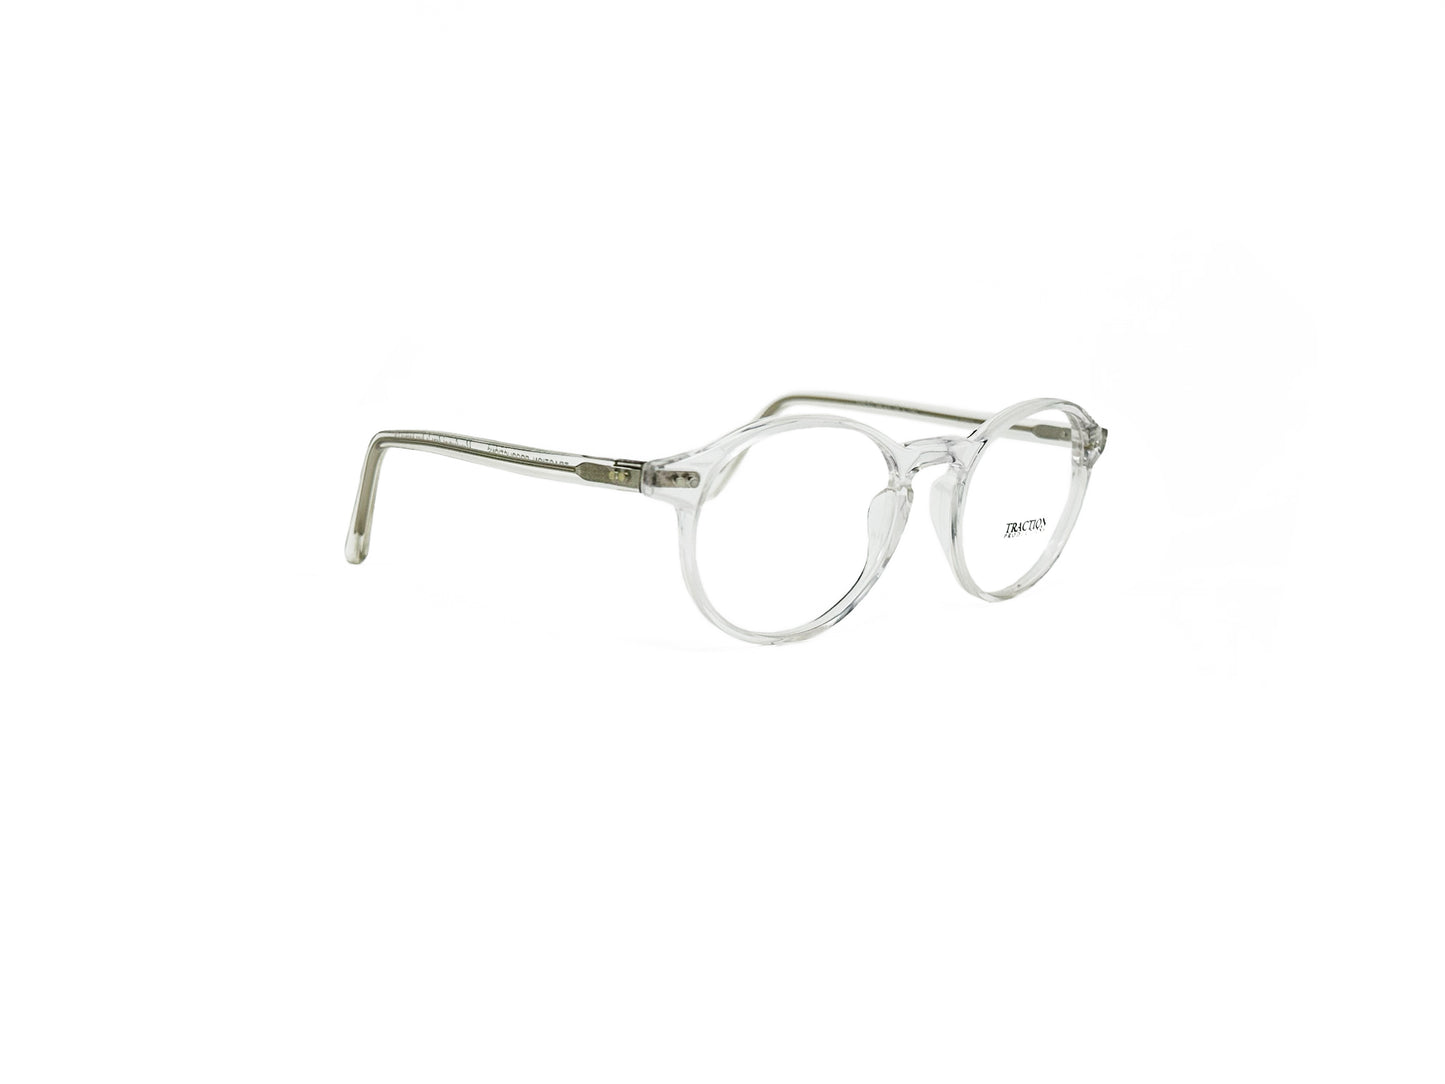 Traction round acetate optical frame. Model: Ando. Color: Cristal - Transparent. Side view.